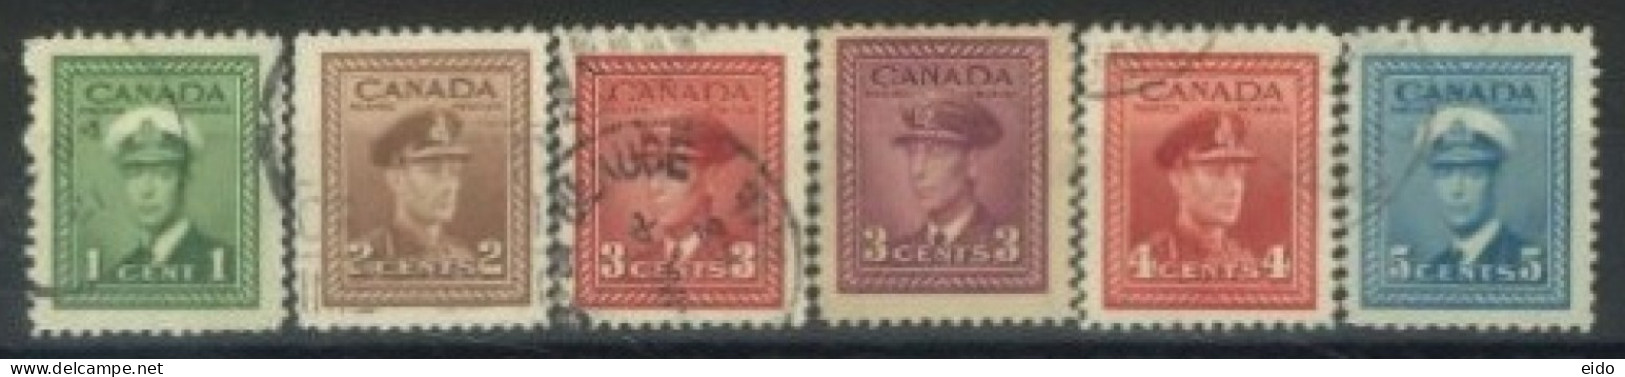 CANADA - 1942, KING GEORGE VI IN NAVAL UNIFORM STAMPS SET OF 6, USED. - Oblitérés